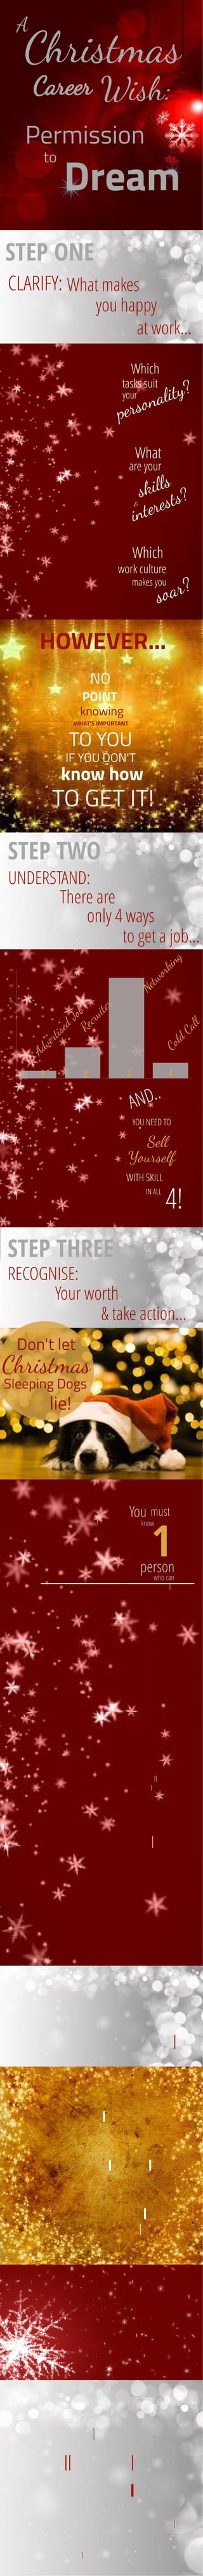 Permission
Christmas
A
What makes 
at work...
to
Dream
 you happy
CLARIFY:
What 
are your
skills
&
interests?
Career Wish:
WHAT'S IMPORTANT 
NO
 POINT
knowing 
IF YOU DON'T
know how 
There are   
only 4 ways  
UNDERSTAND:
to get a job...
TO GET IT!
TO YOU
0
10
20
30
40
50
60
70
Advertised
Job
Recruiter
Networking
Cold
Call
Christmas
Sleeping Dogs
WITH SKILL
IN ALL
AND..
.YOU NEED TO
Sell
4!
Don't let
lie!
RECOGNISE:
Your worth
& take action...
Which
work culture
makes you
soar?
Which
tasks suit
your
personality?
HOWEVER...
11
1
65
 You spend
 months
 of the year
 at work
 You must
know
 person
 who can
help
STEP ONE
STEP TWO
STEP THREE
Yourself
 You
 will work
 until you are
 at least
 Why not be happy
at work
?
STEP FOUR
CELEBRATE:
2018 with a career plan
GO ONLINE
& access career resources
VET SELLING SKILLS
résumé & interviews
SET A STRATEGIC PLAN
with concrete KPIs 
1.
2.
3.
 You
CAN be happy
at work!
1 2 3 4
FOR EXPERT
CAREER ADVICE...
follow us online!
catherine cunningham
www.careerconsult.com.au
the career consultancy
the career consultancy
katy1mary1
 